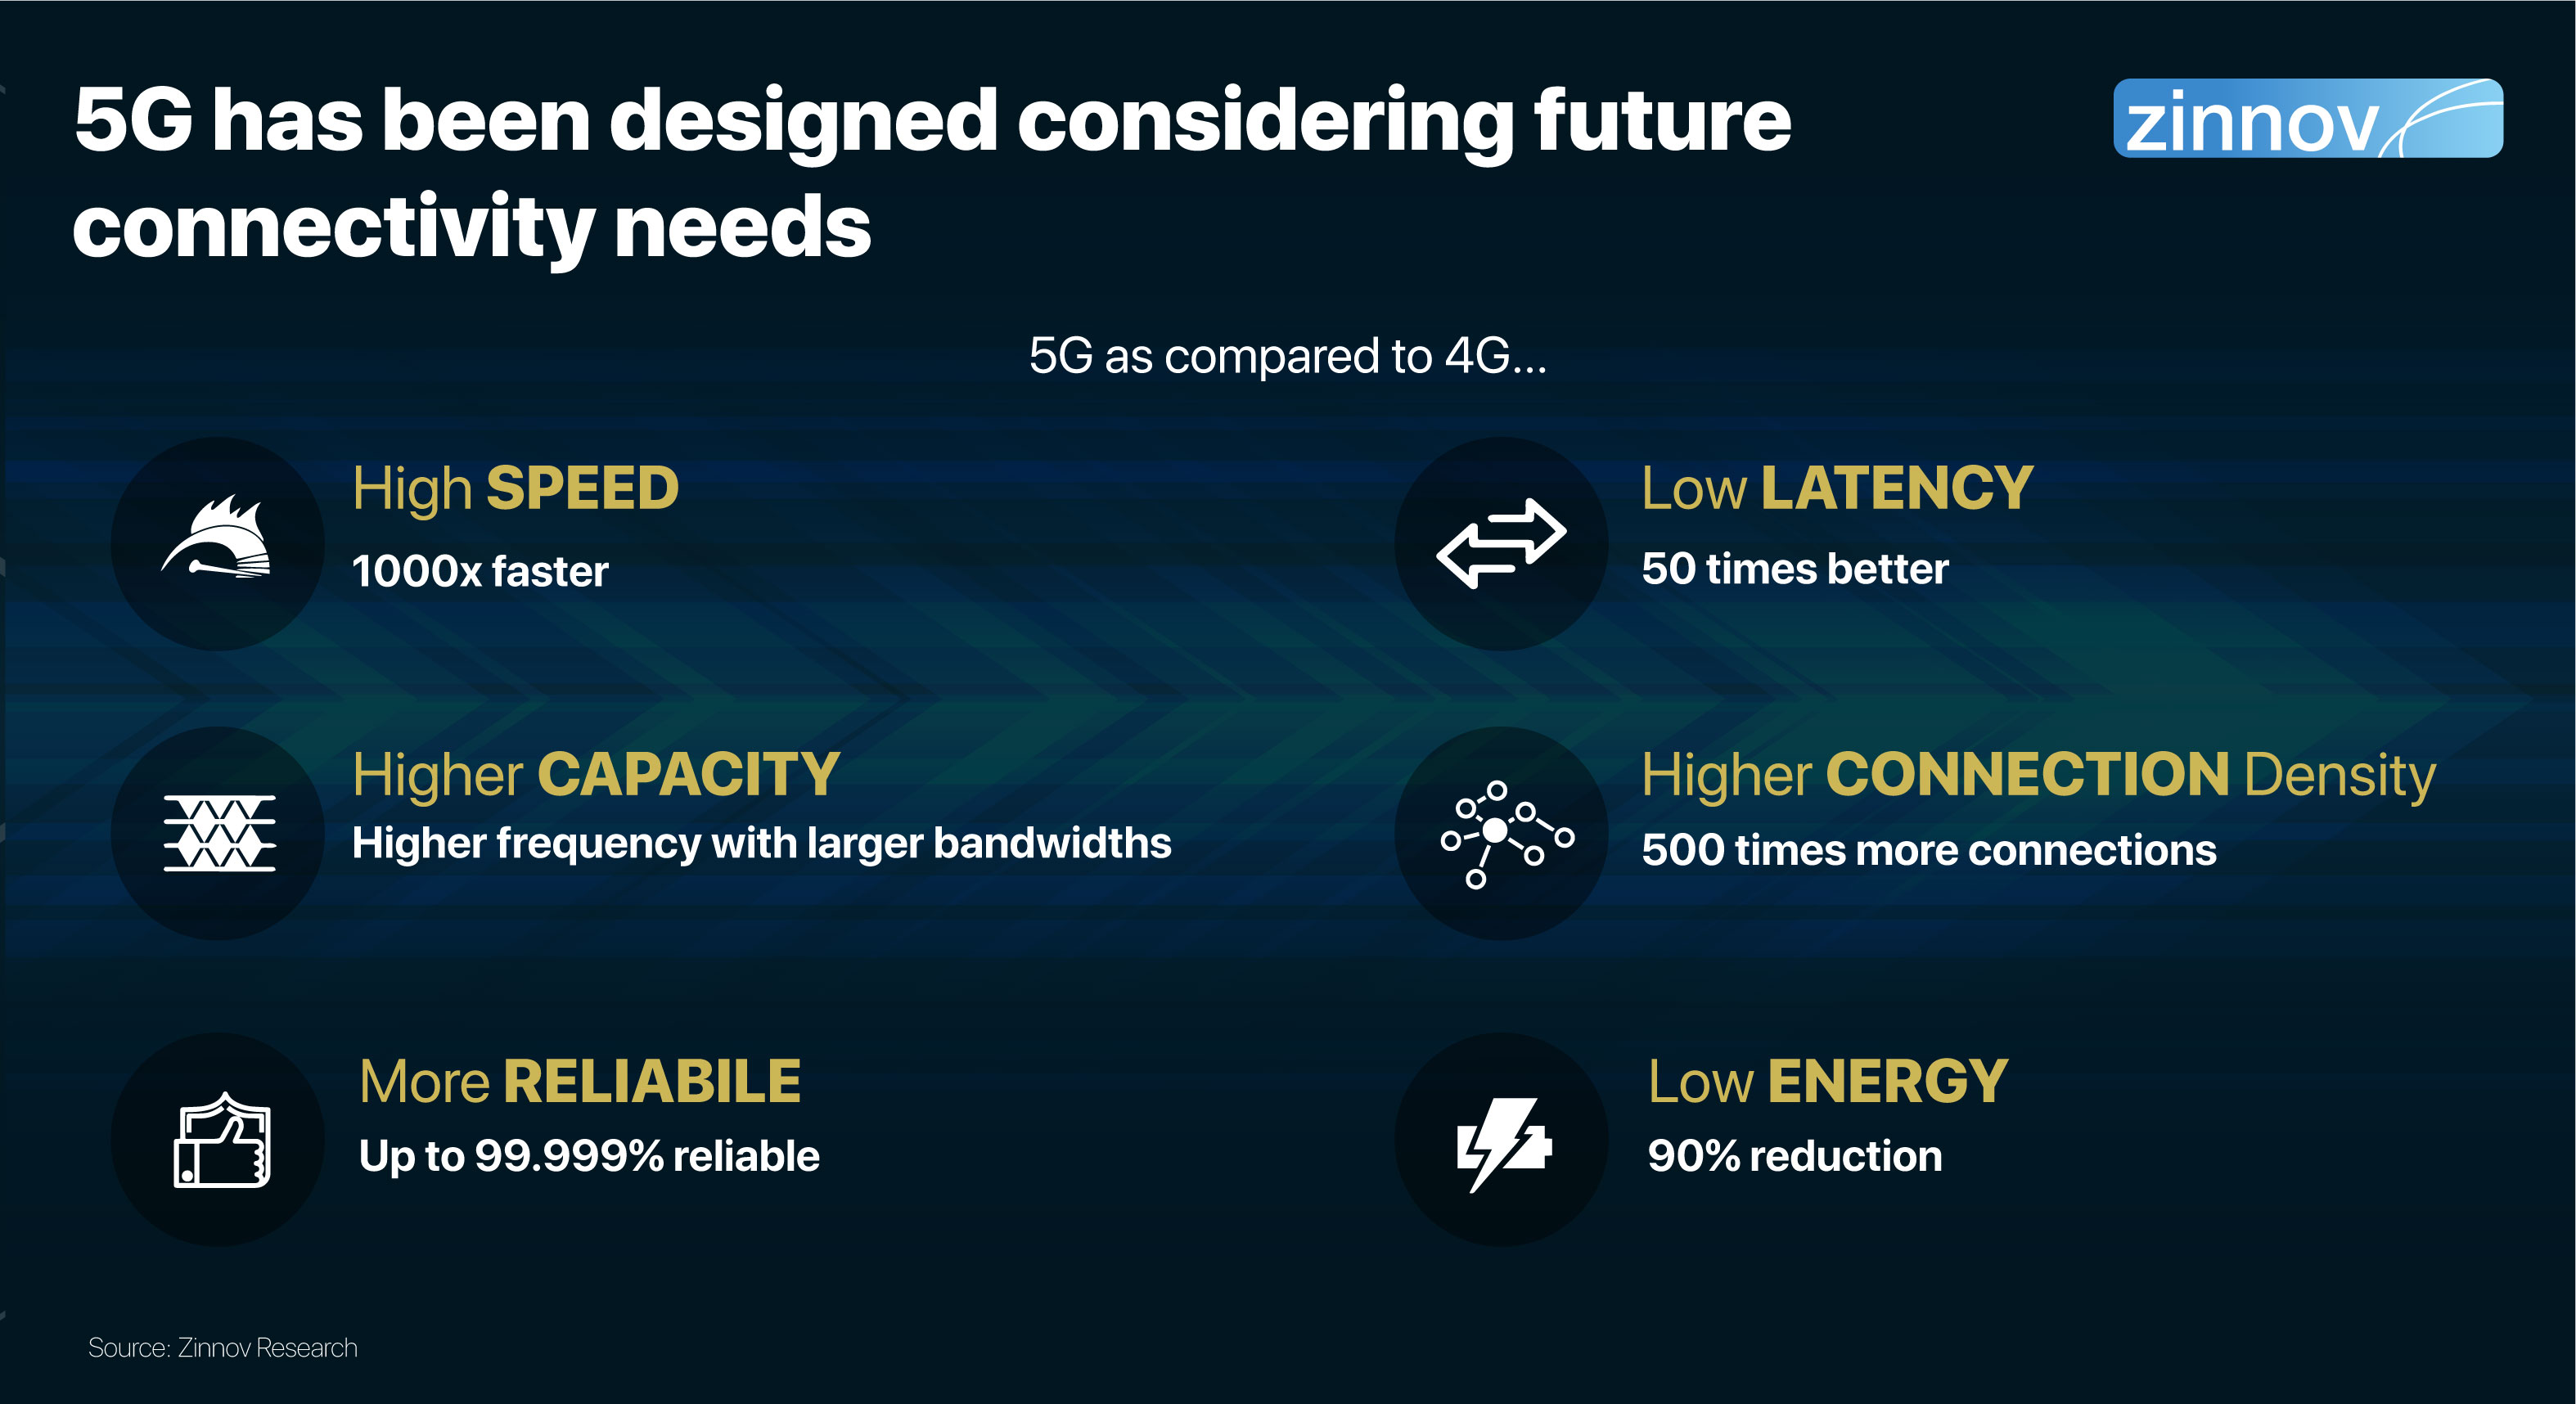 5G as compared to 4G